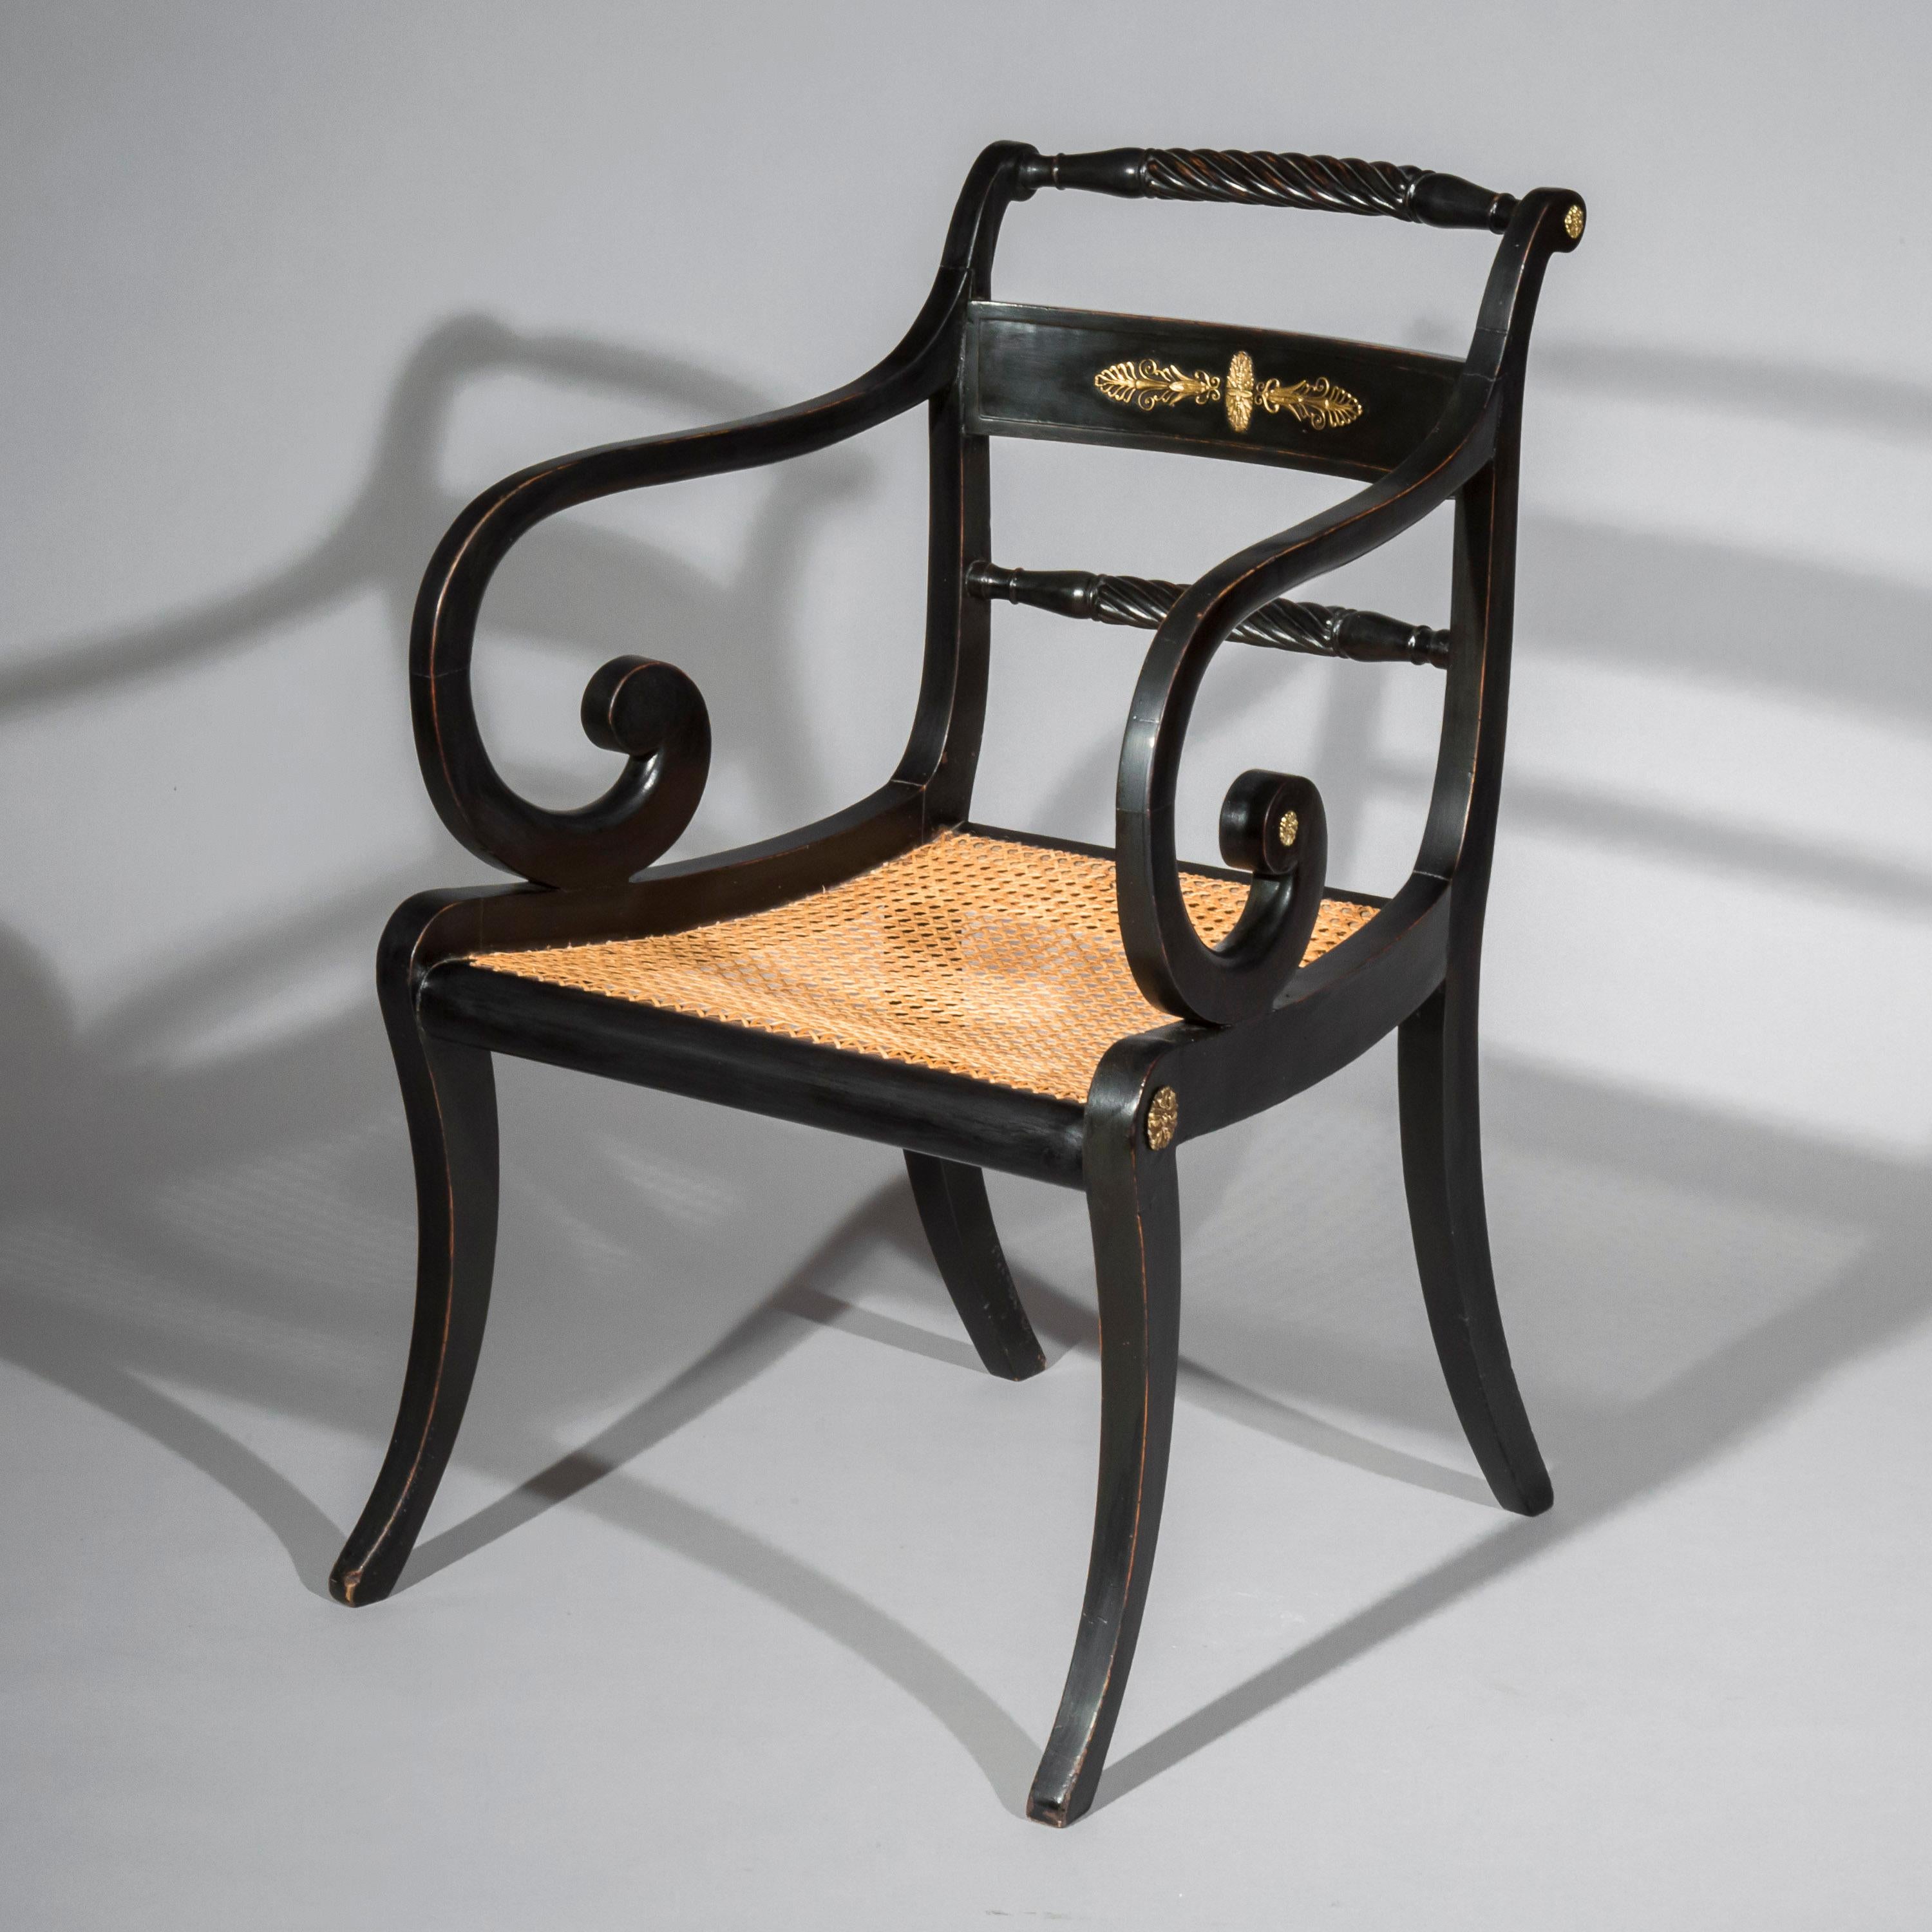 An early 19th century Regency period black painted and brass-mounted desk armchair of Greek Revival Klismos form, in the taste of Thomas Hope.

English, circa 1810.

This black-japanned and cane-seated chair, with Grecian boldly curved legs and